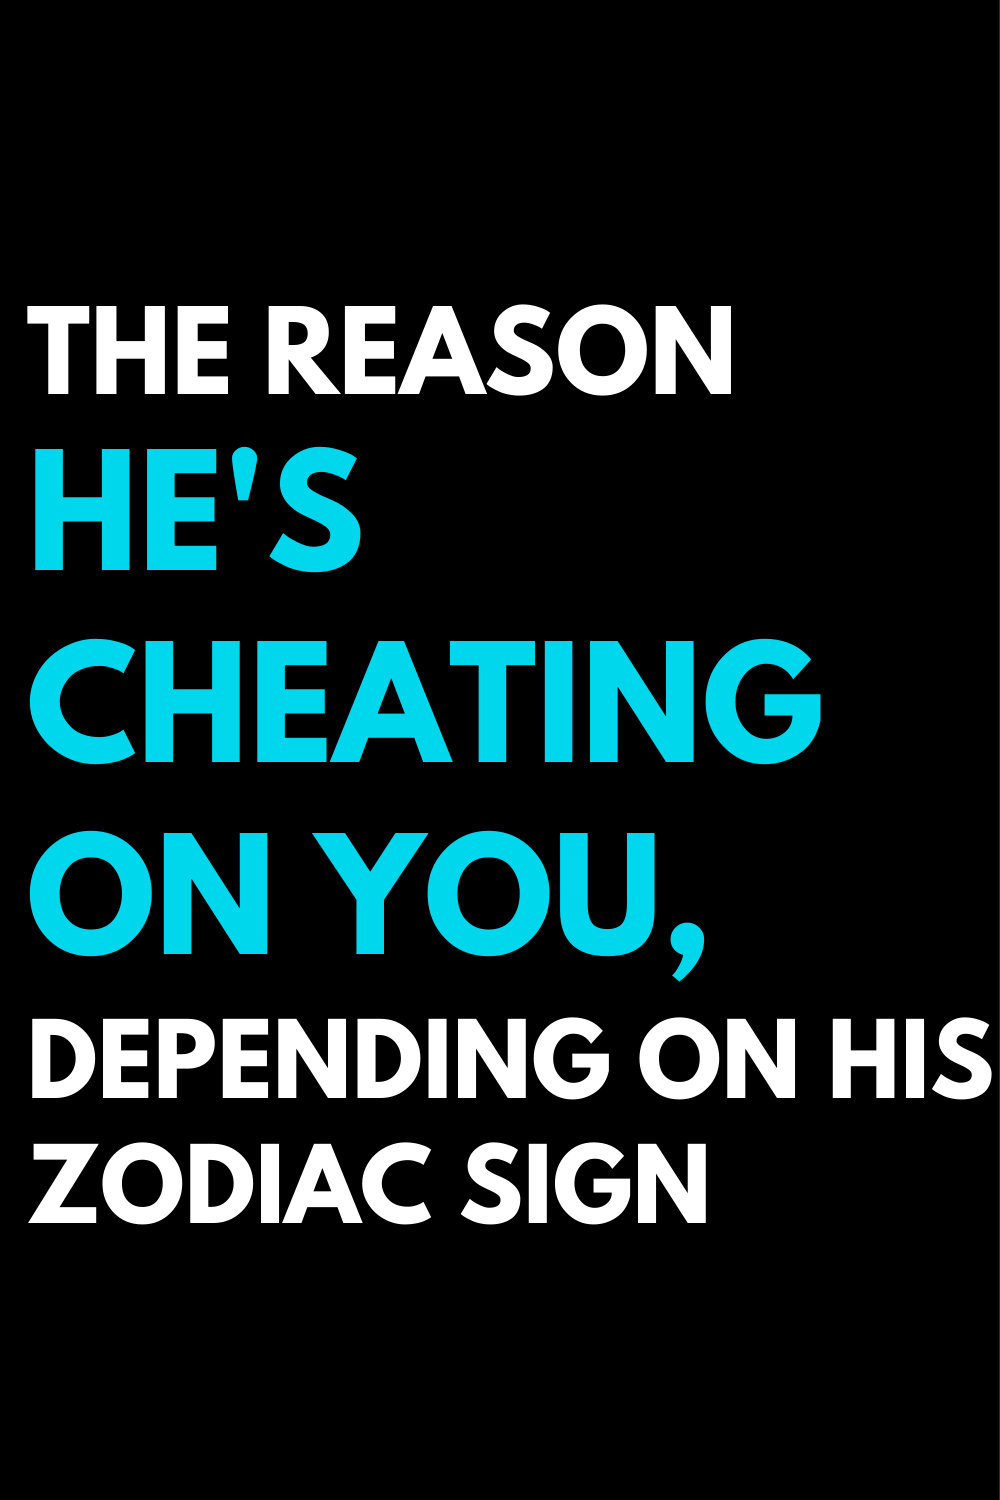 The reason he's cheating on you, depending on his zodiac sign